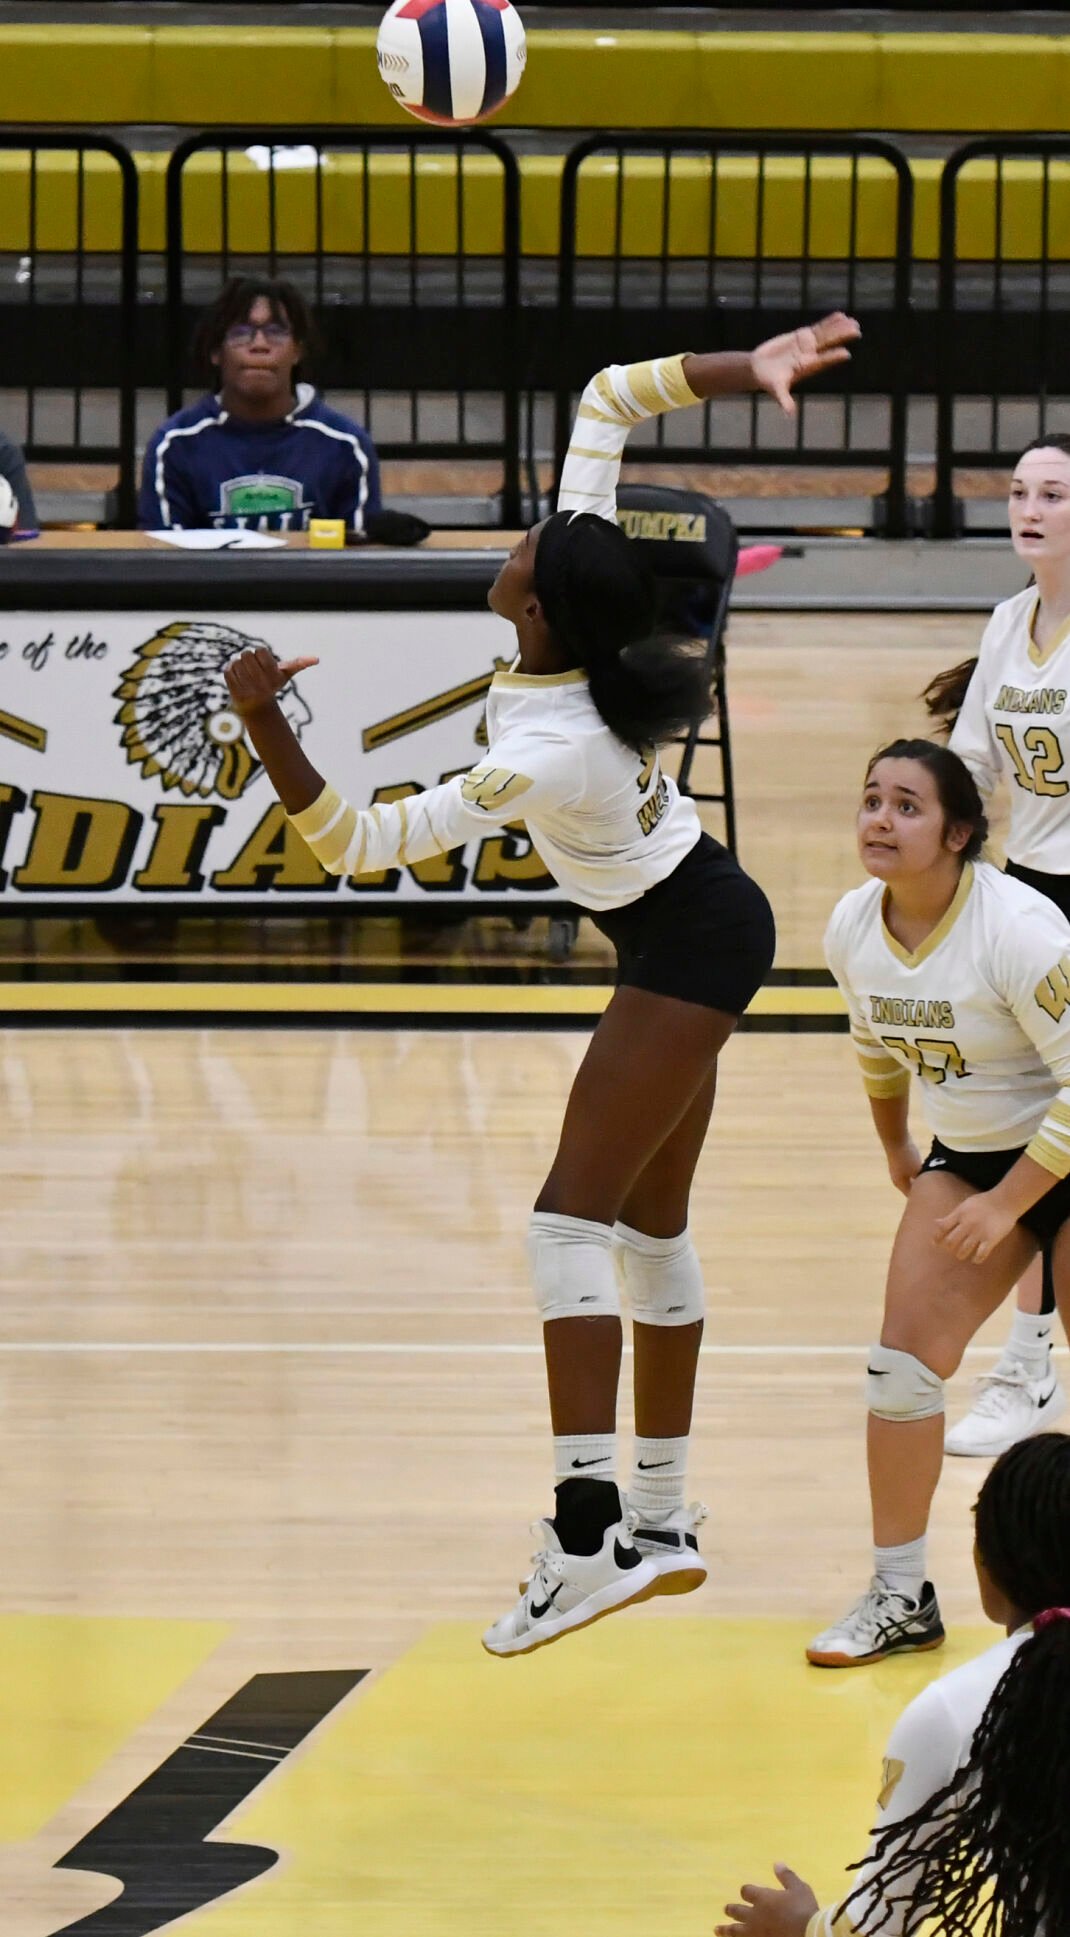 Wetumpka area title volleyball